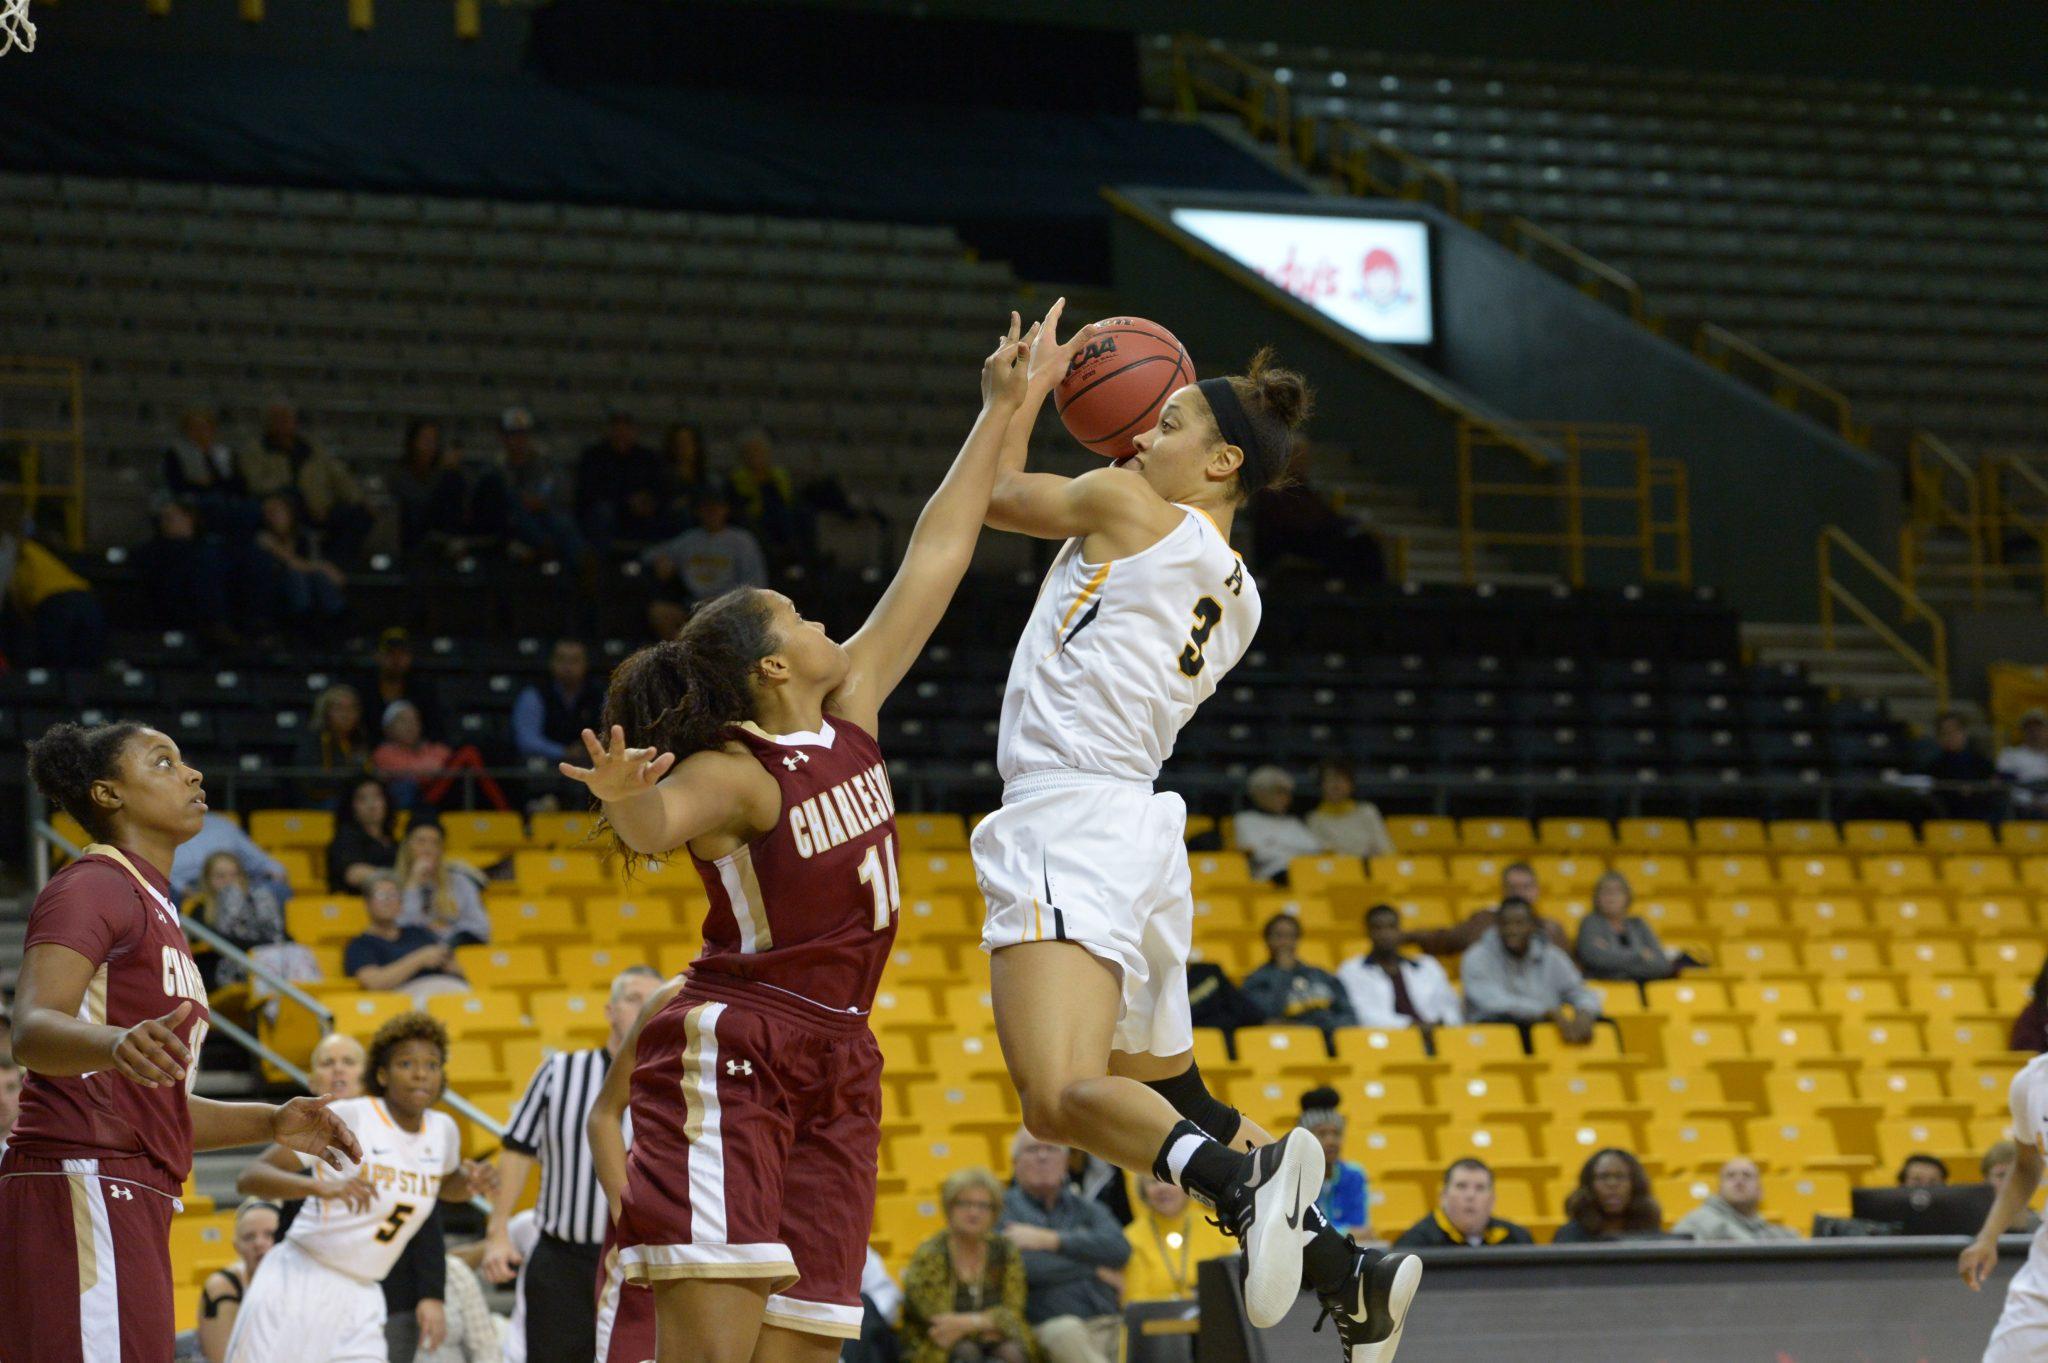 Bria Carter finished with a career high 14 rebounds en-route to a double-double. 
Photo courtesy: App State Athletics/ Dave Mayo